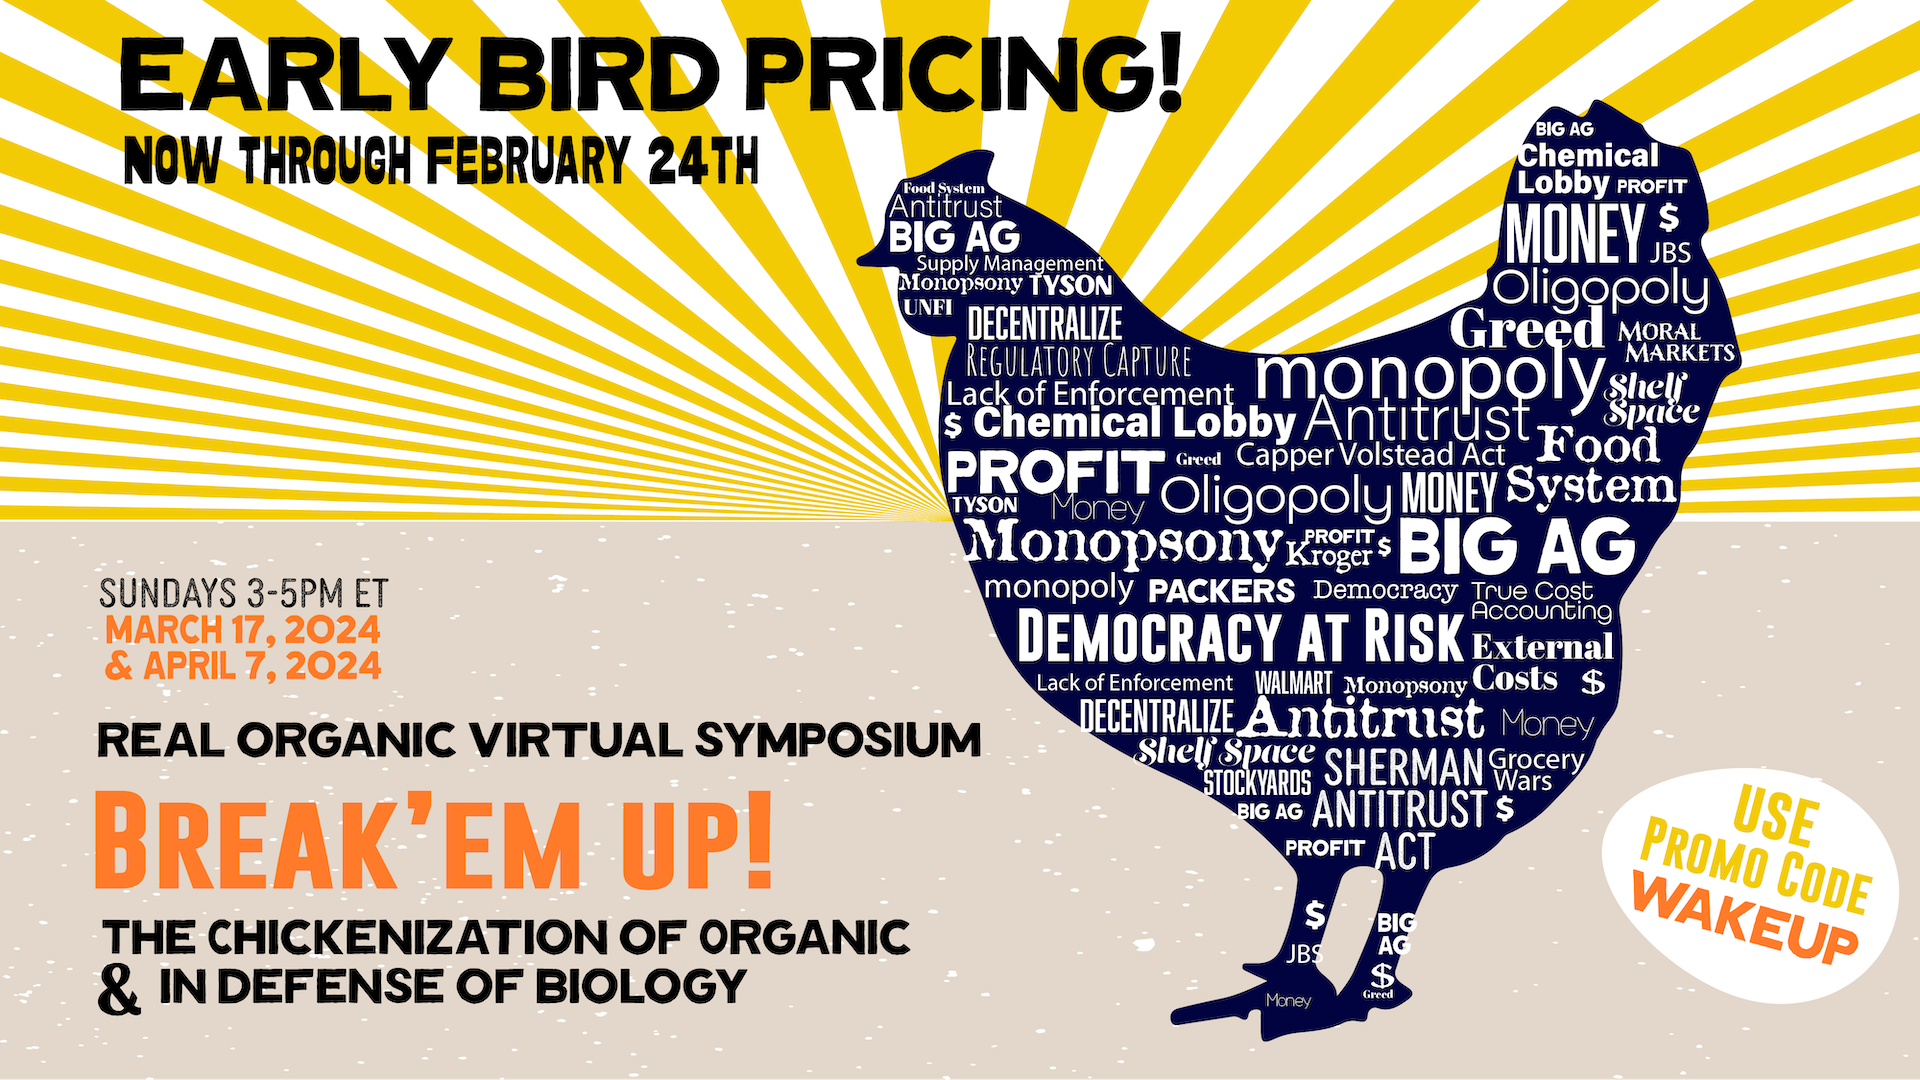 Real Organic Virtual Symposium early bird pricing graphic featuring a chicken laying an egg with "wakeup" promo code